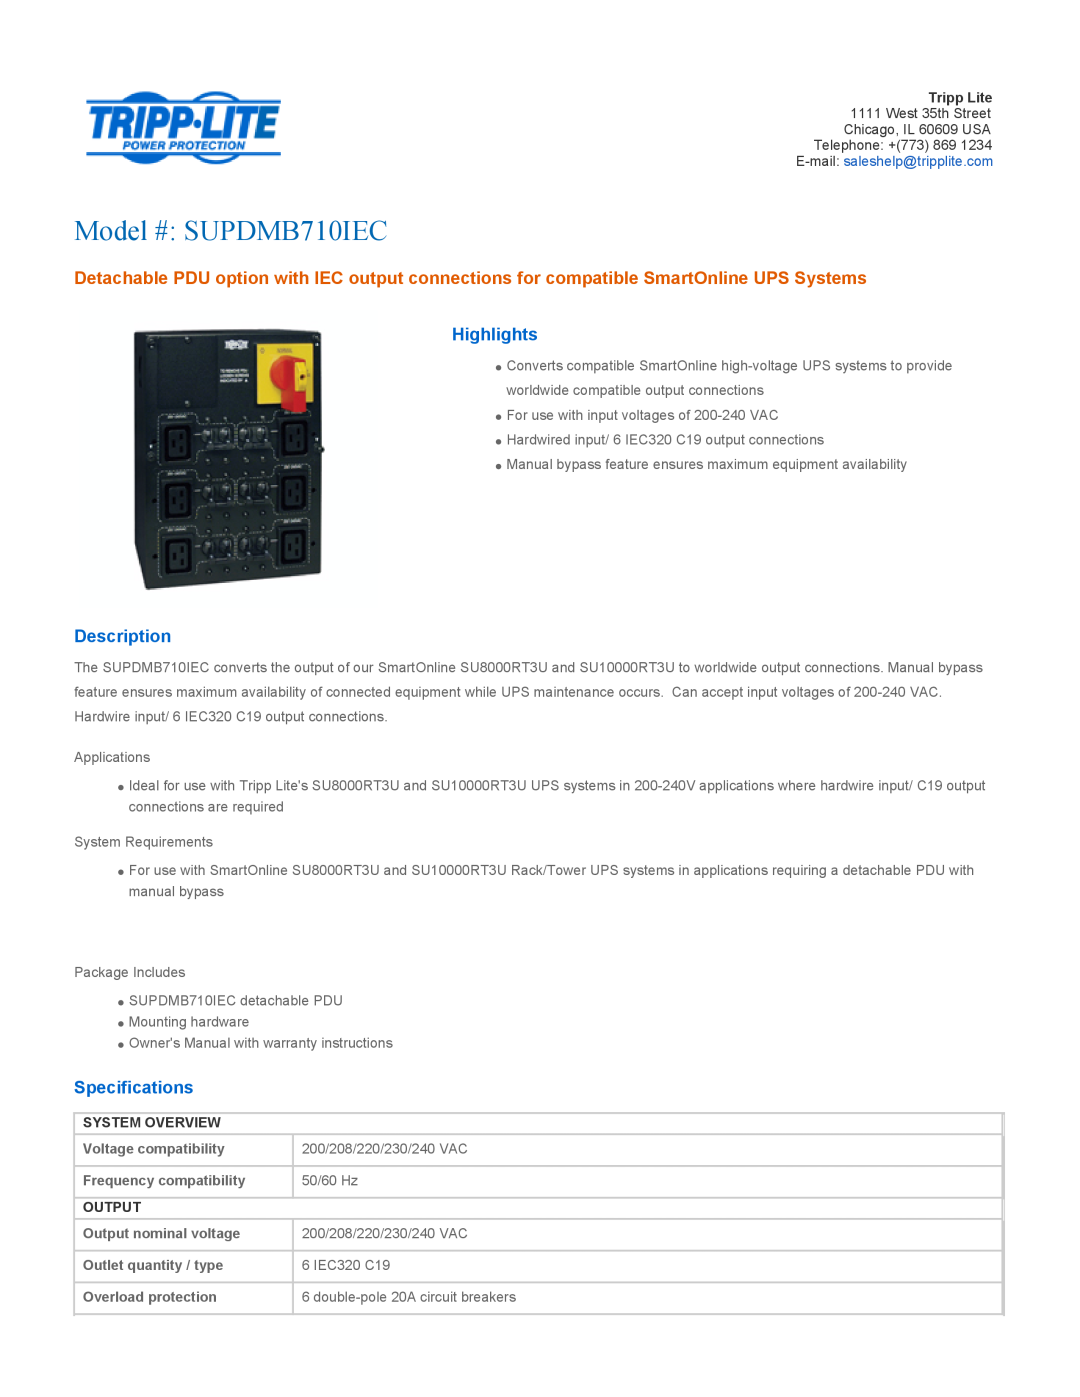 Tripp Lite specifications System Overview, Output, Model # SUPDMB710IEC, Highlights, Description, Specifications 